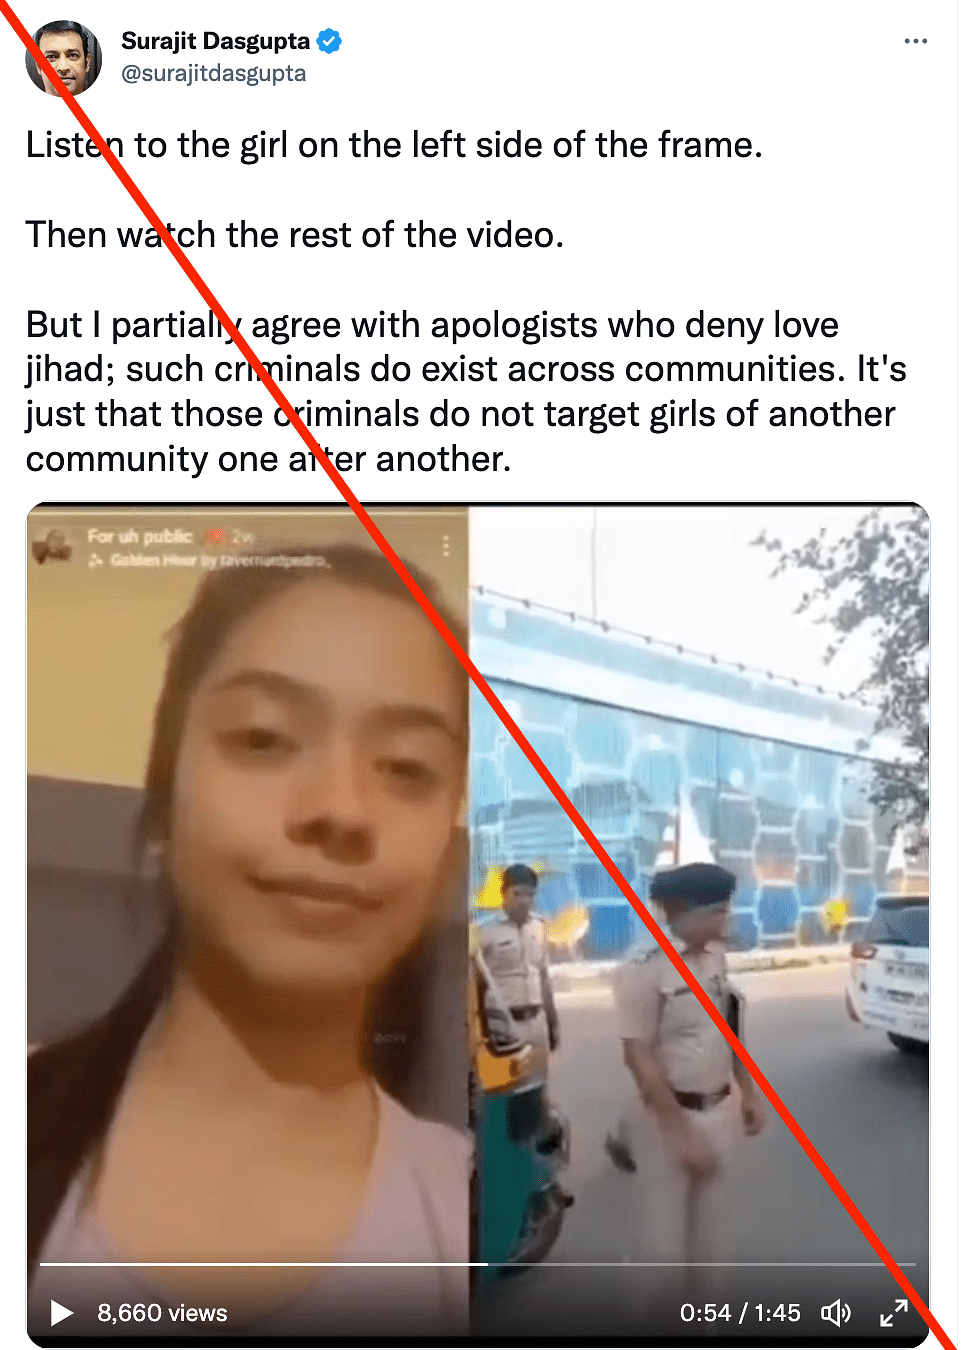 We found at least six instances where unrelated videos/photos were given a false communal spin.